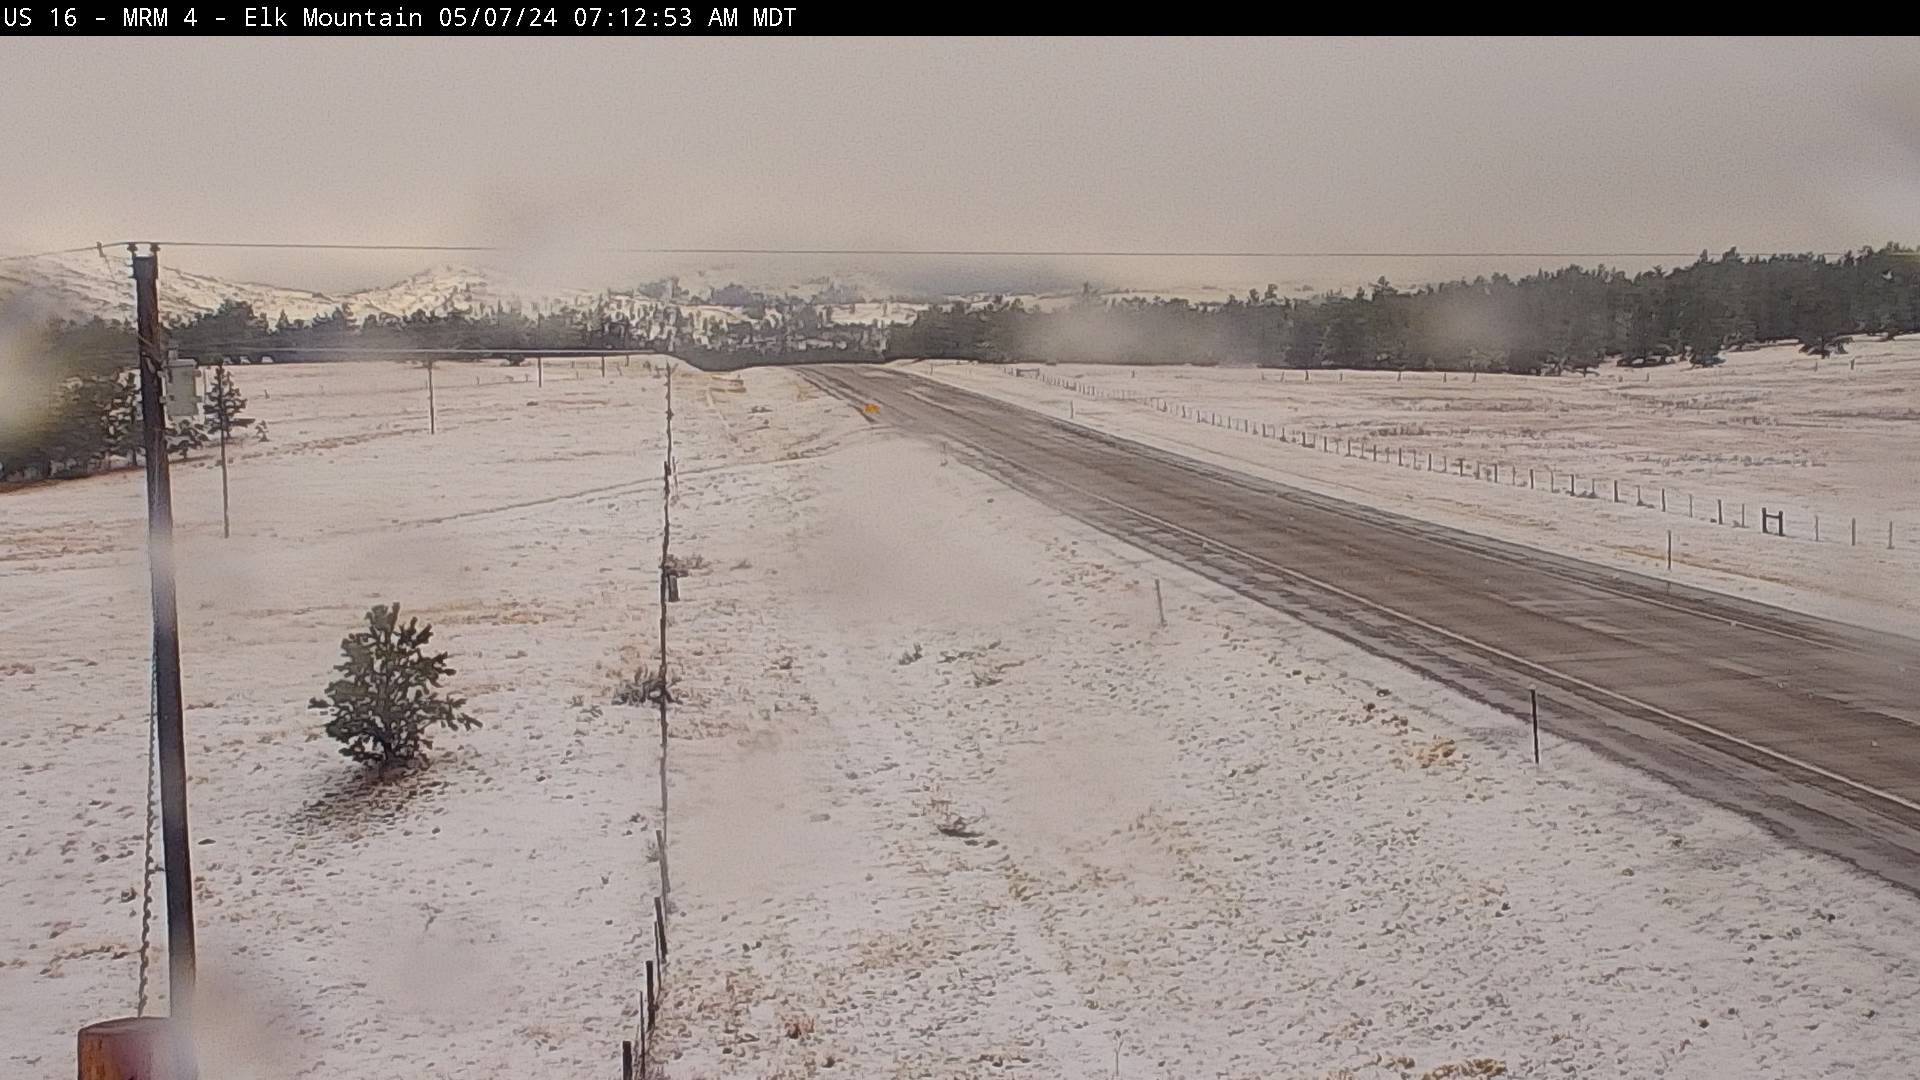 23 miles west of Custer along US-16 @ MM 4 - West Traffic Camera